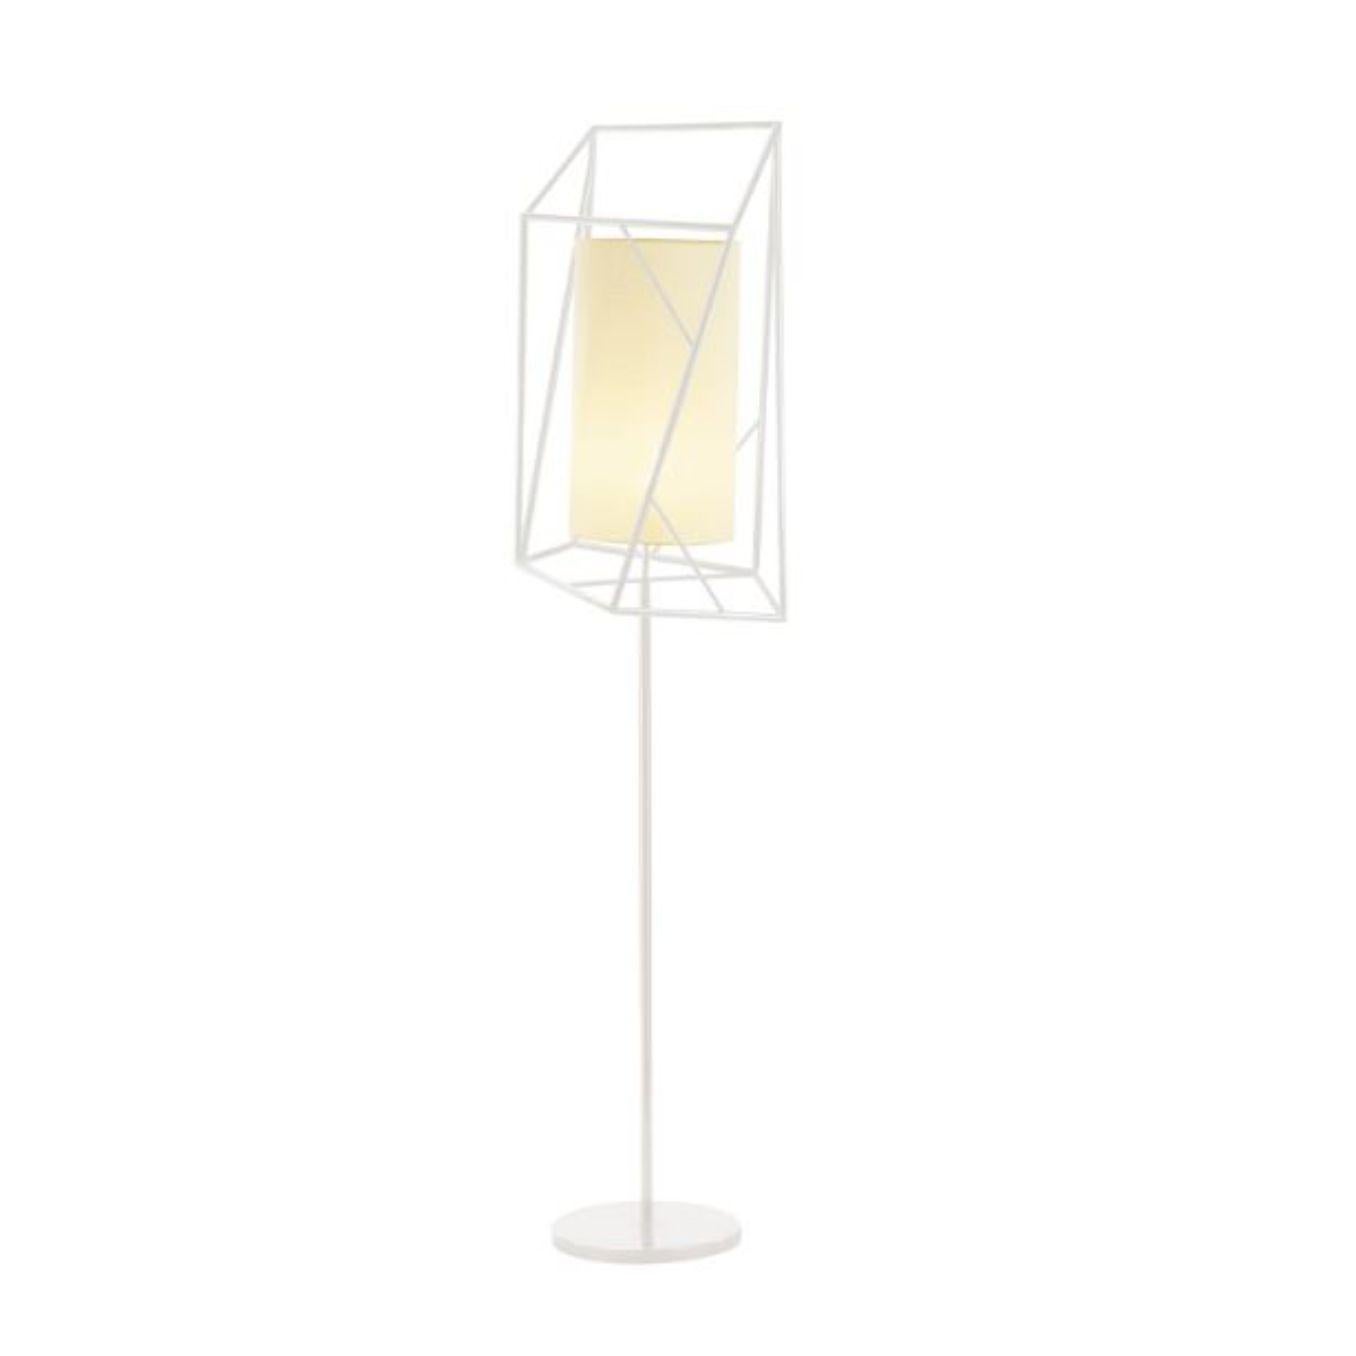 Ivory star floor lamp by Dooq.
Dimensions: W 45 x D 45 x H 170 cm.
Materials: lacquered metal, polished or satin metal.
Abat-jour: linen
Also available in different colors and materials.

Information:
230V/50Hz
E27/1x20W